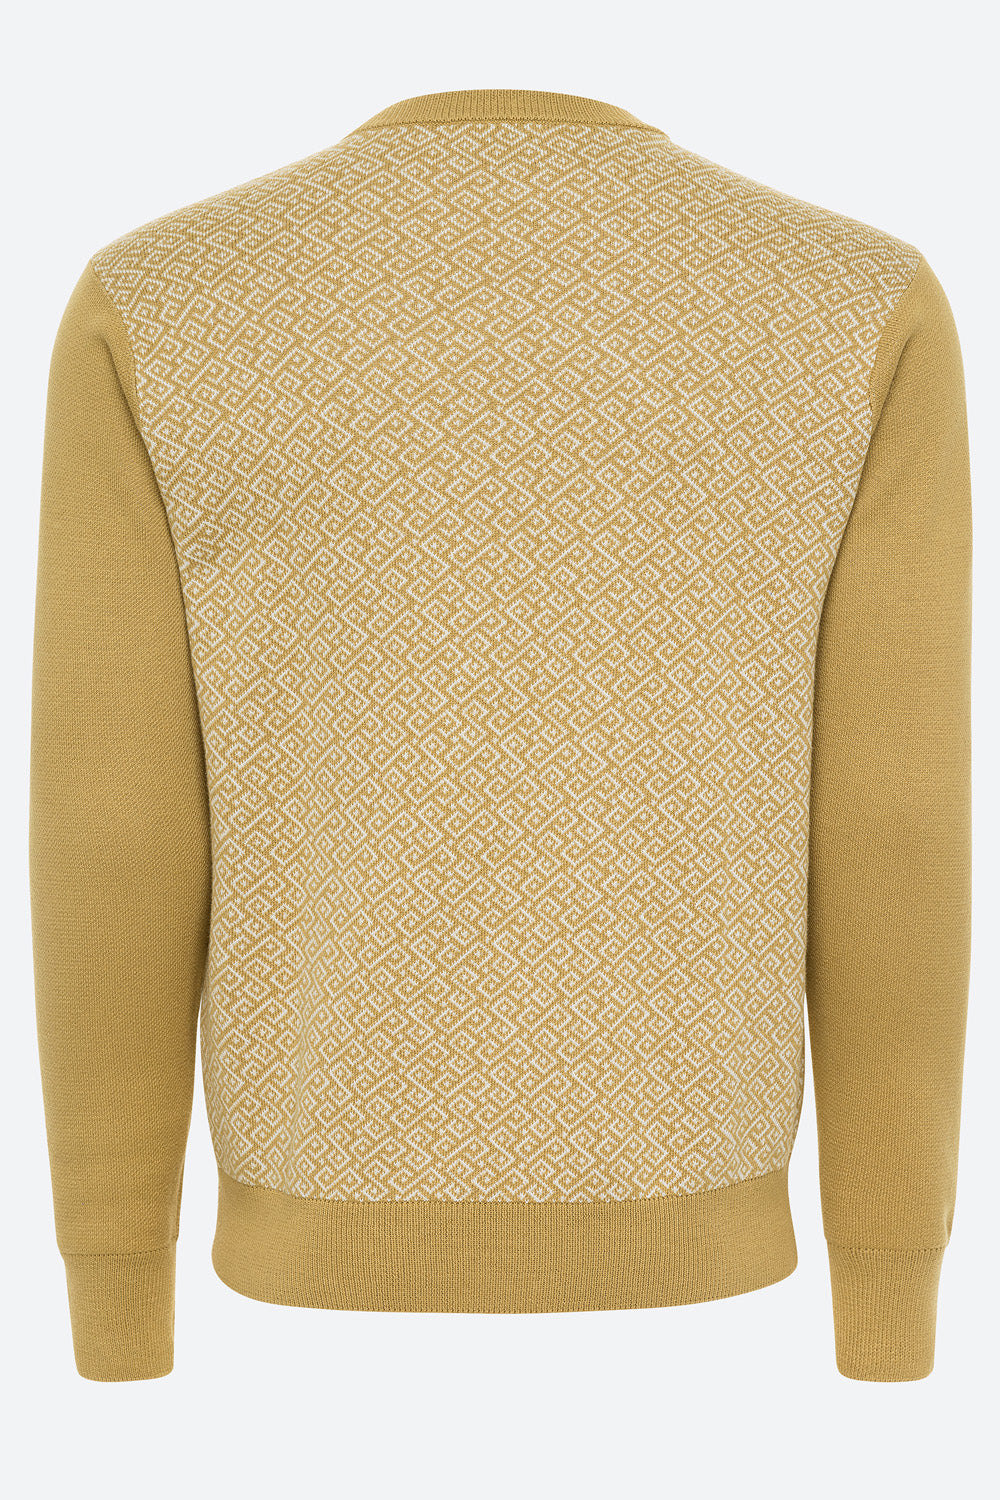 Ivo Cotton Knit Logo Back Sweater in Camel and Off-White